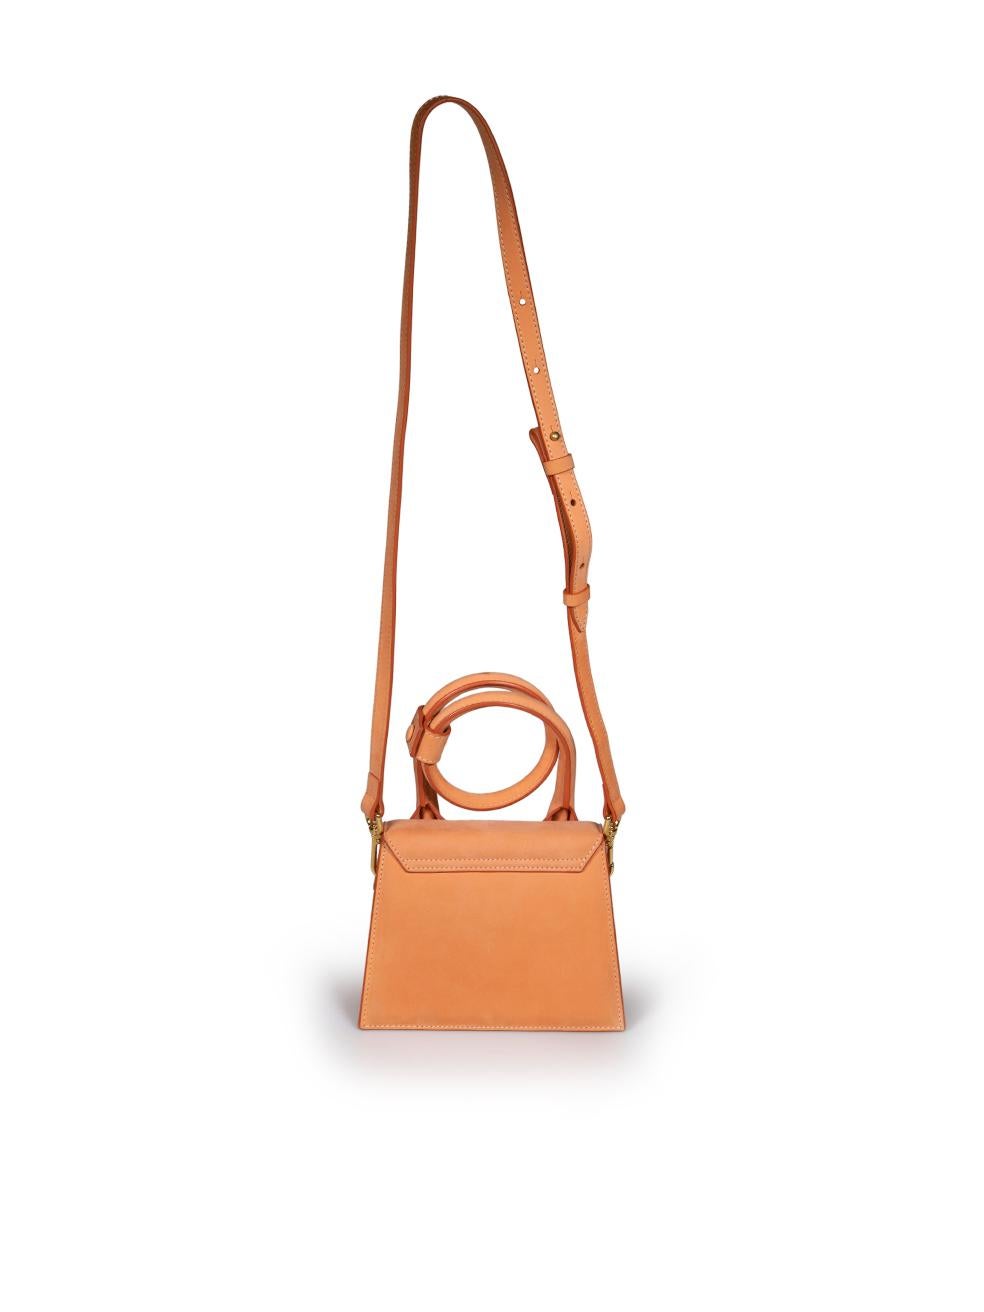 Jacquemus Orange Leather Le Chiquito Noeud Top Handle Bag In Excellent Condition In London, GB